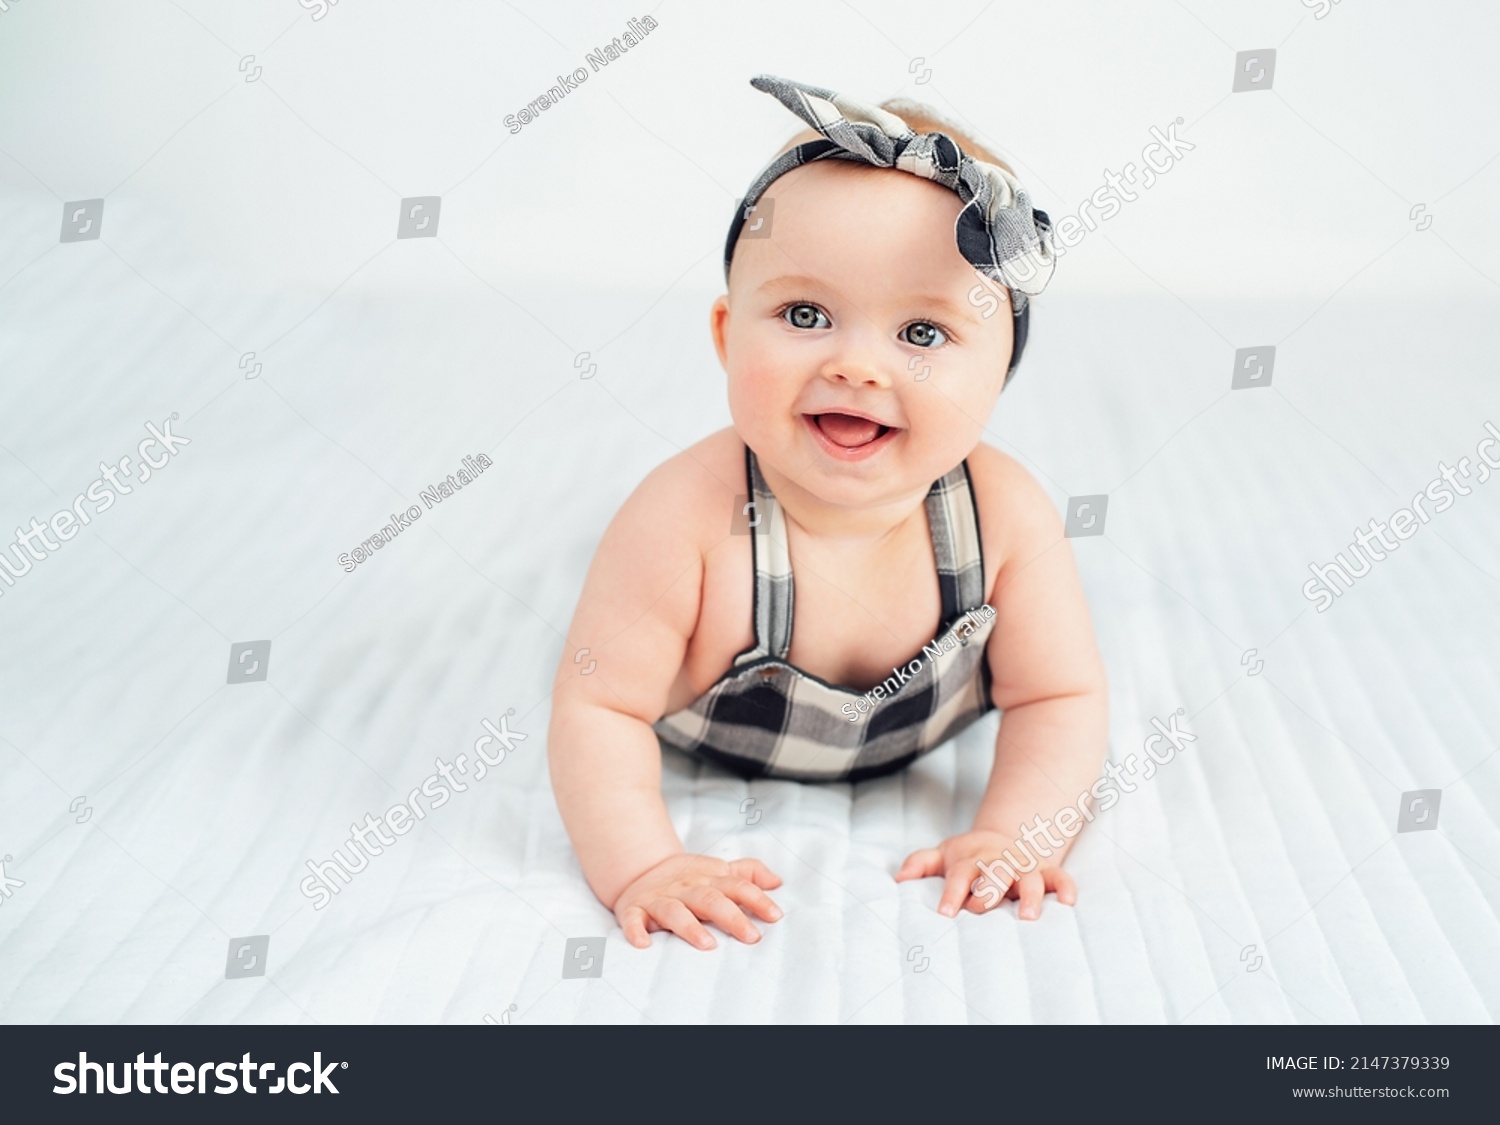 Seven month old baby child sitting on bed. Cute smiling little infant girl on white soft blanket. girl wearing headband. Charming blue eyed baby. Copy space. #2147379339